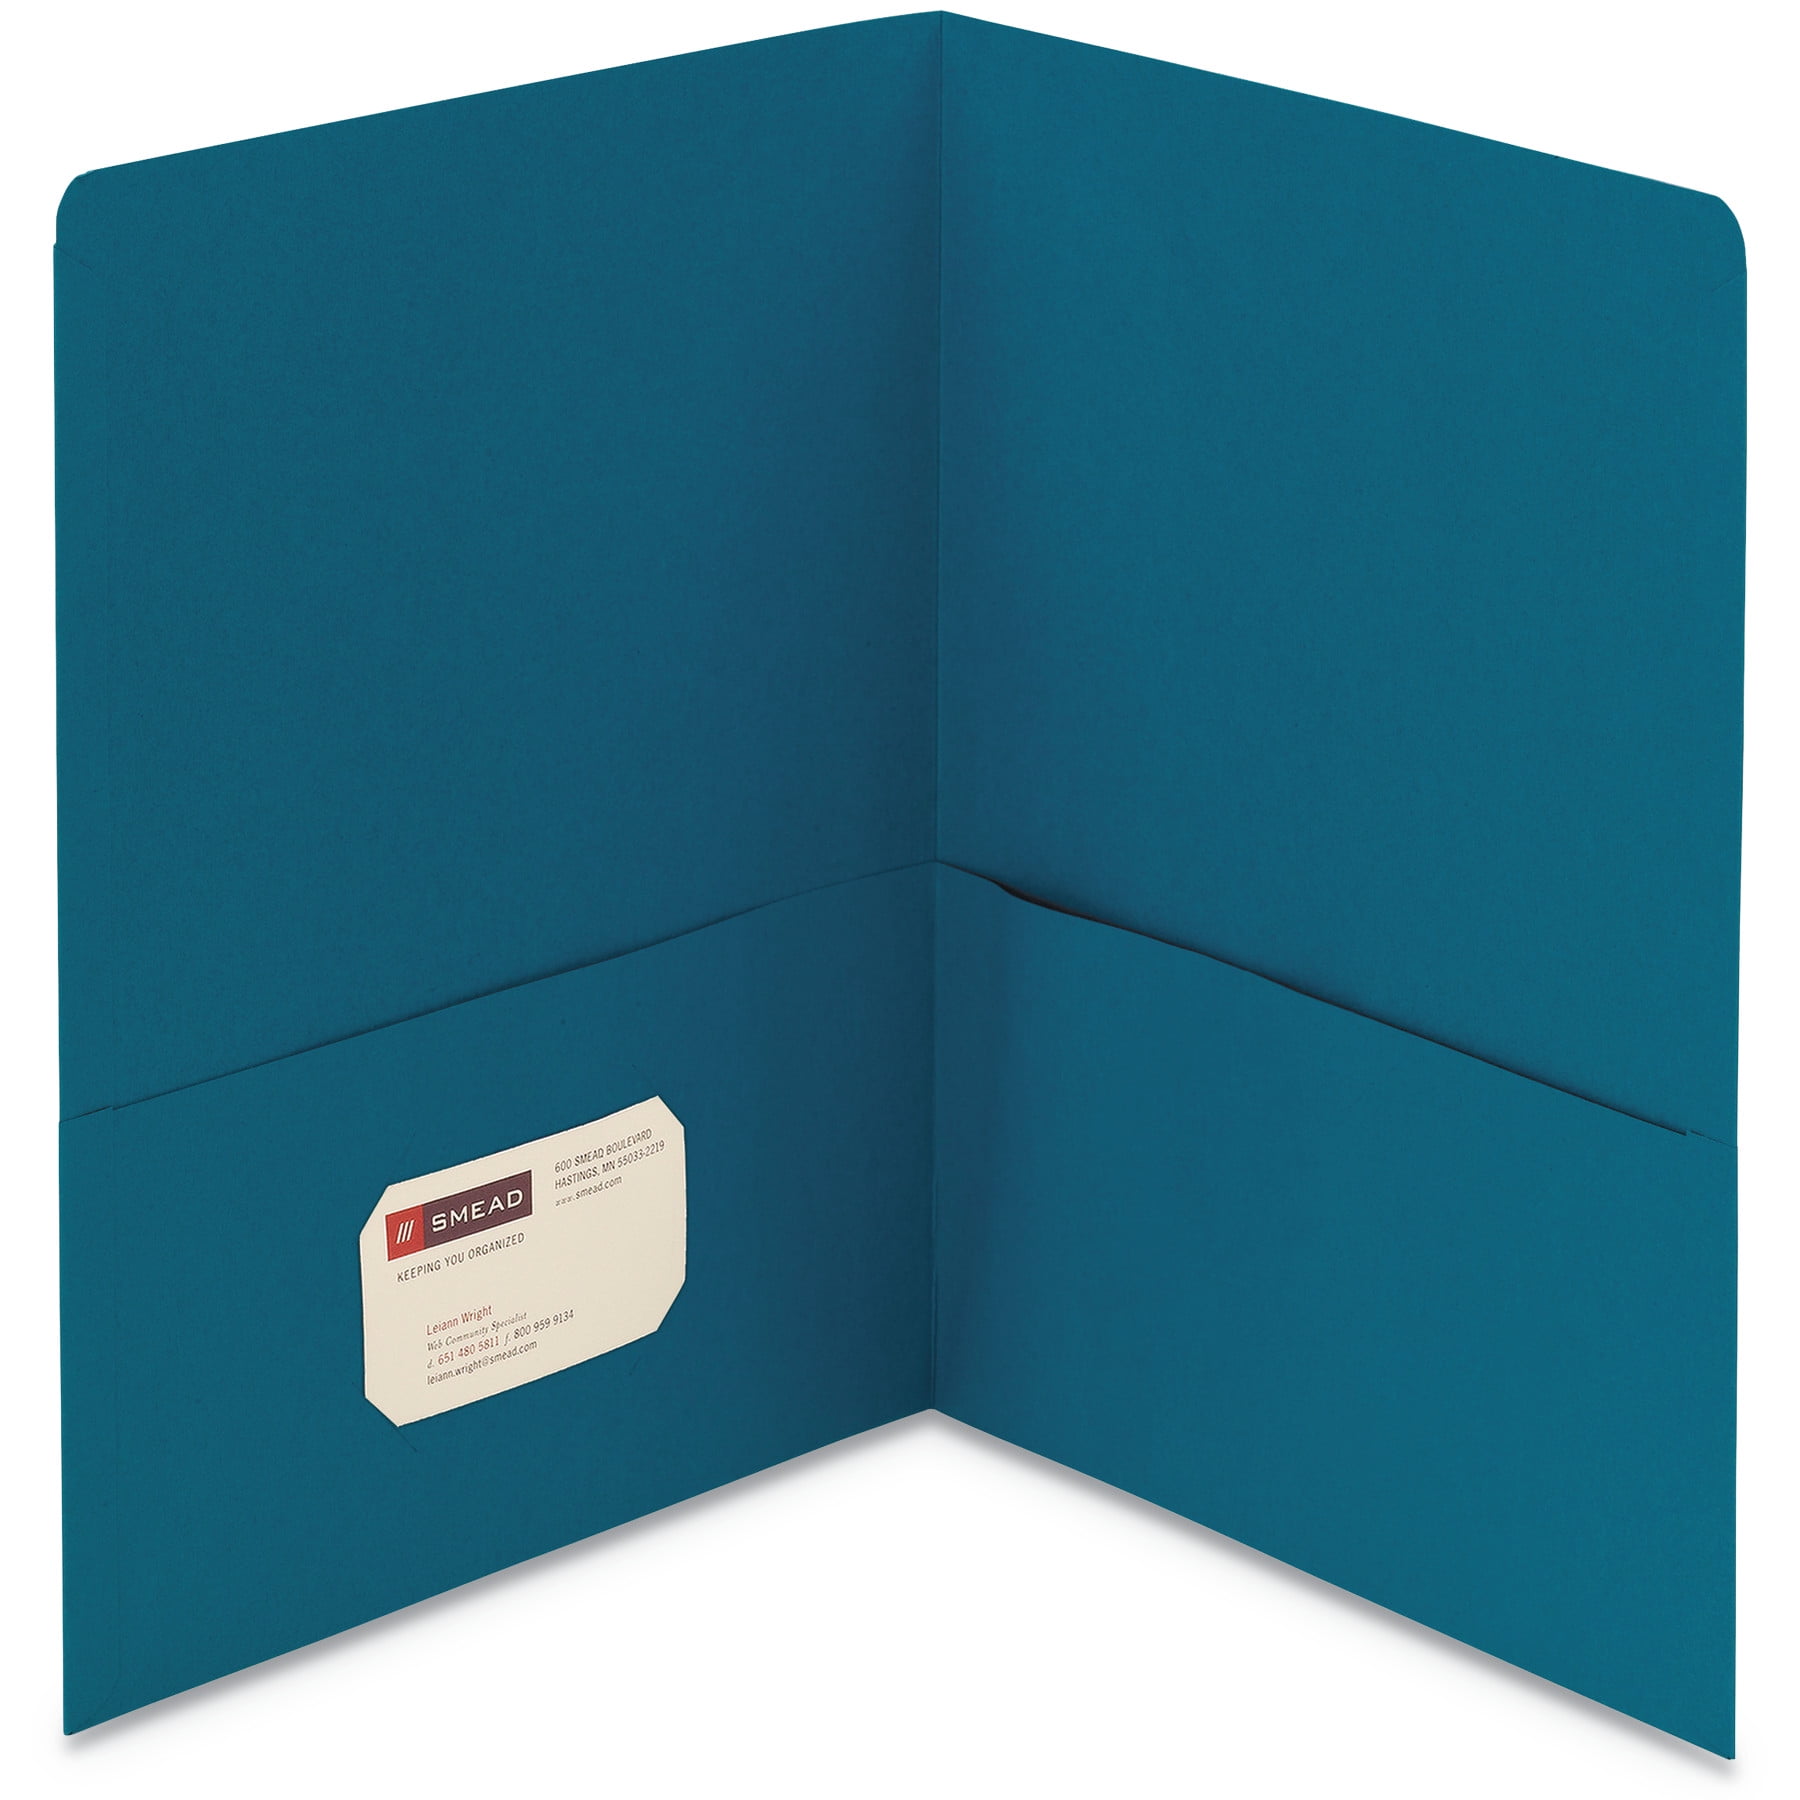 Smead Lockit Two-Pocket Folders 87800 Letter Size Assorted Colors 8 per Pack 